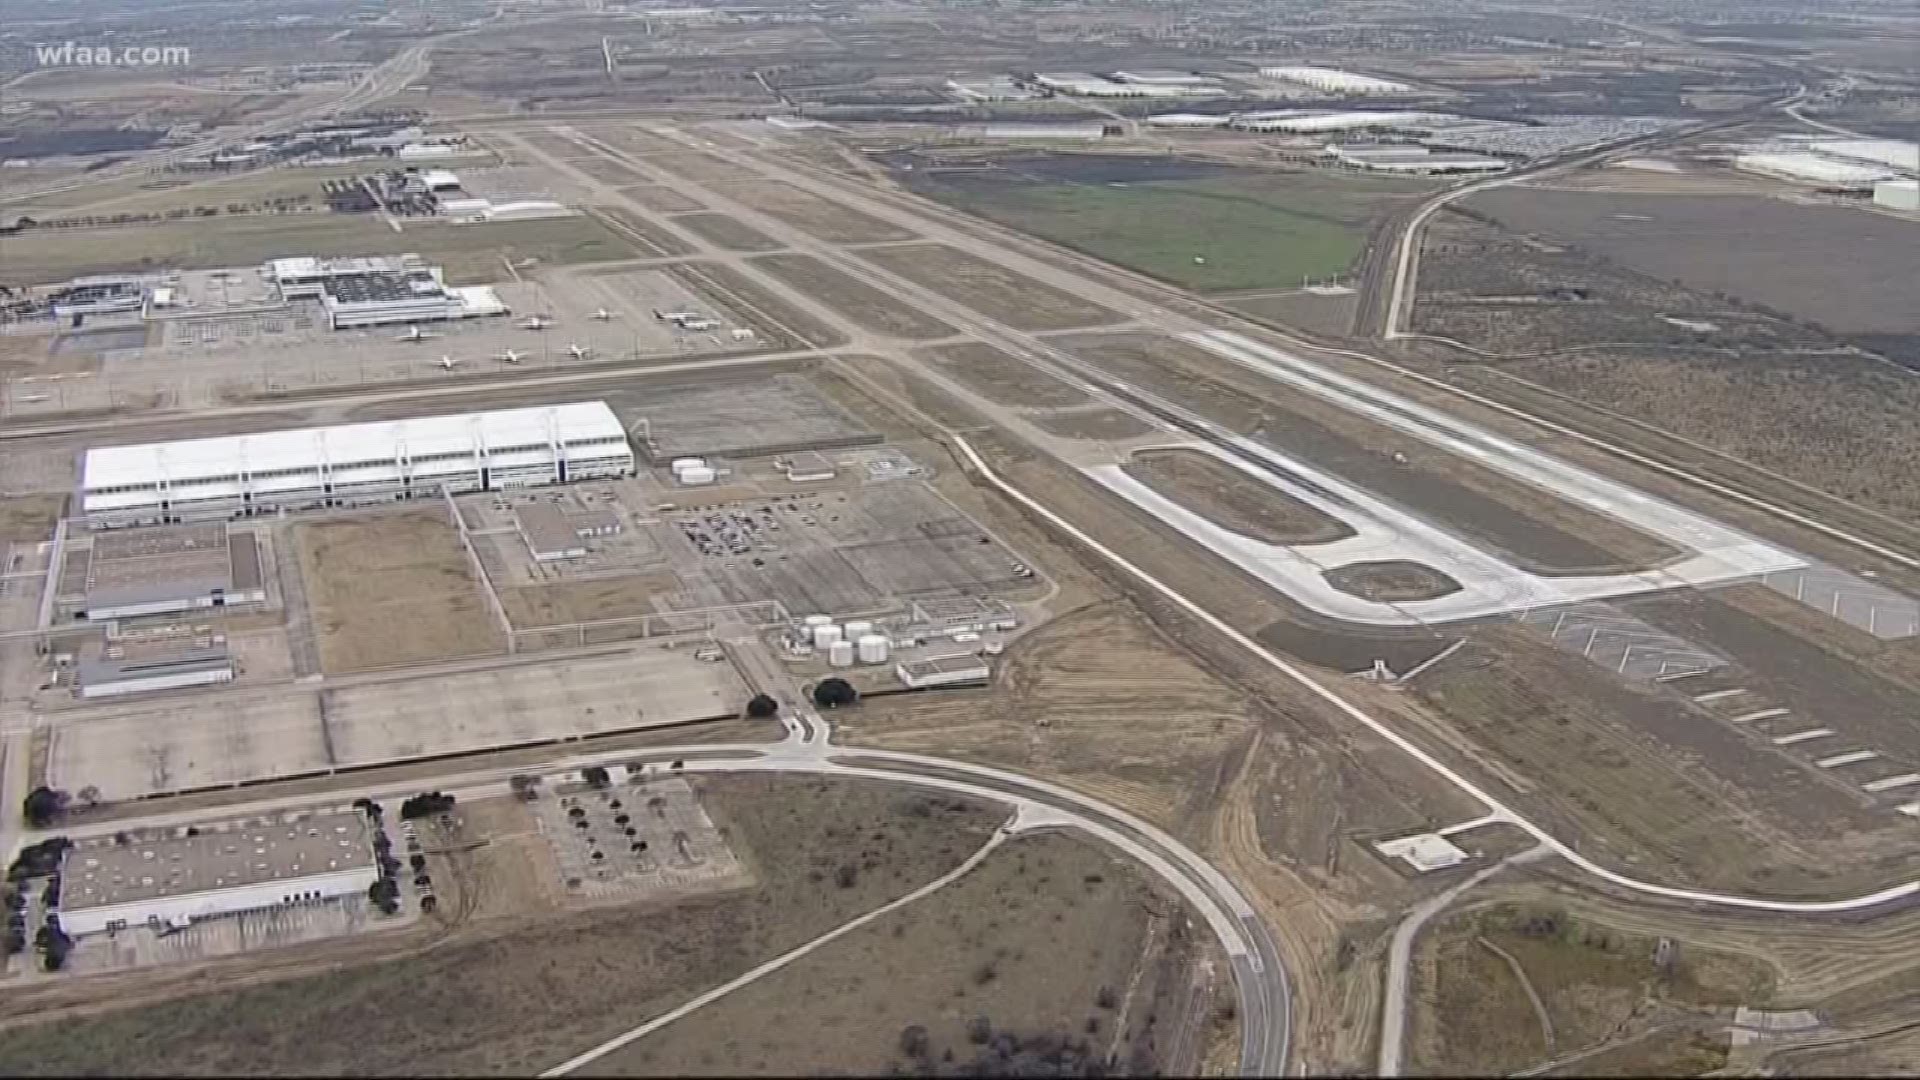 Amazon to open Regional Air hub in Fort Worth